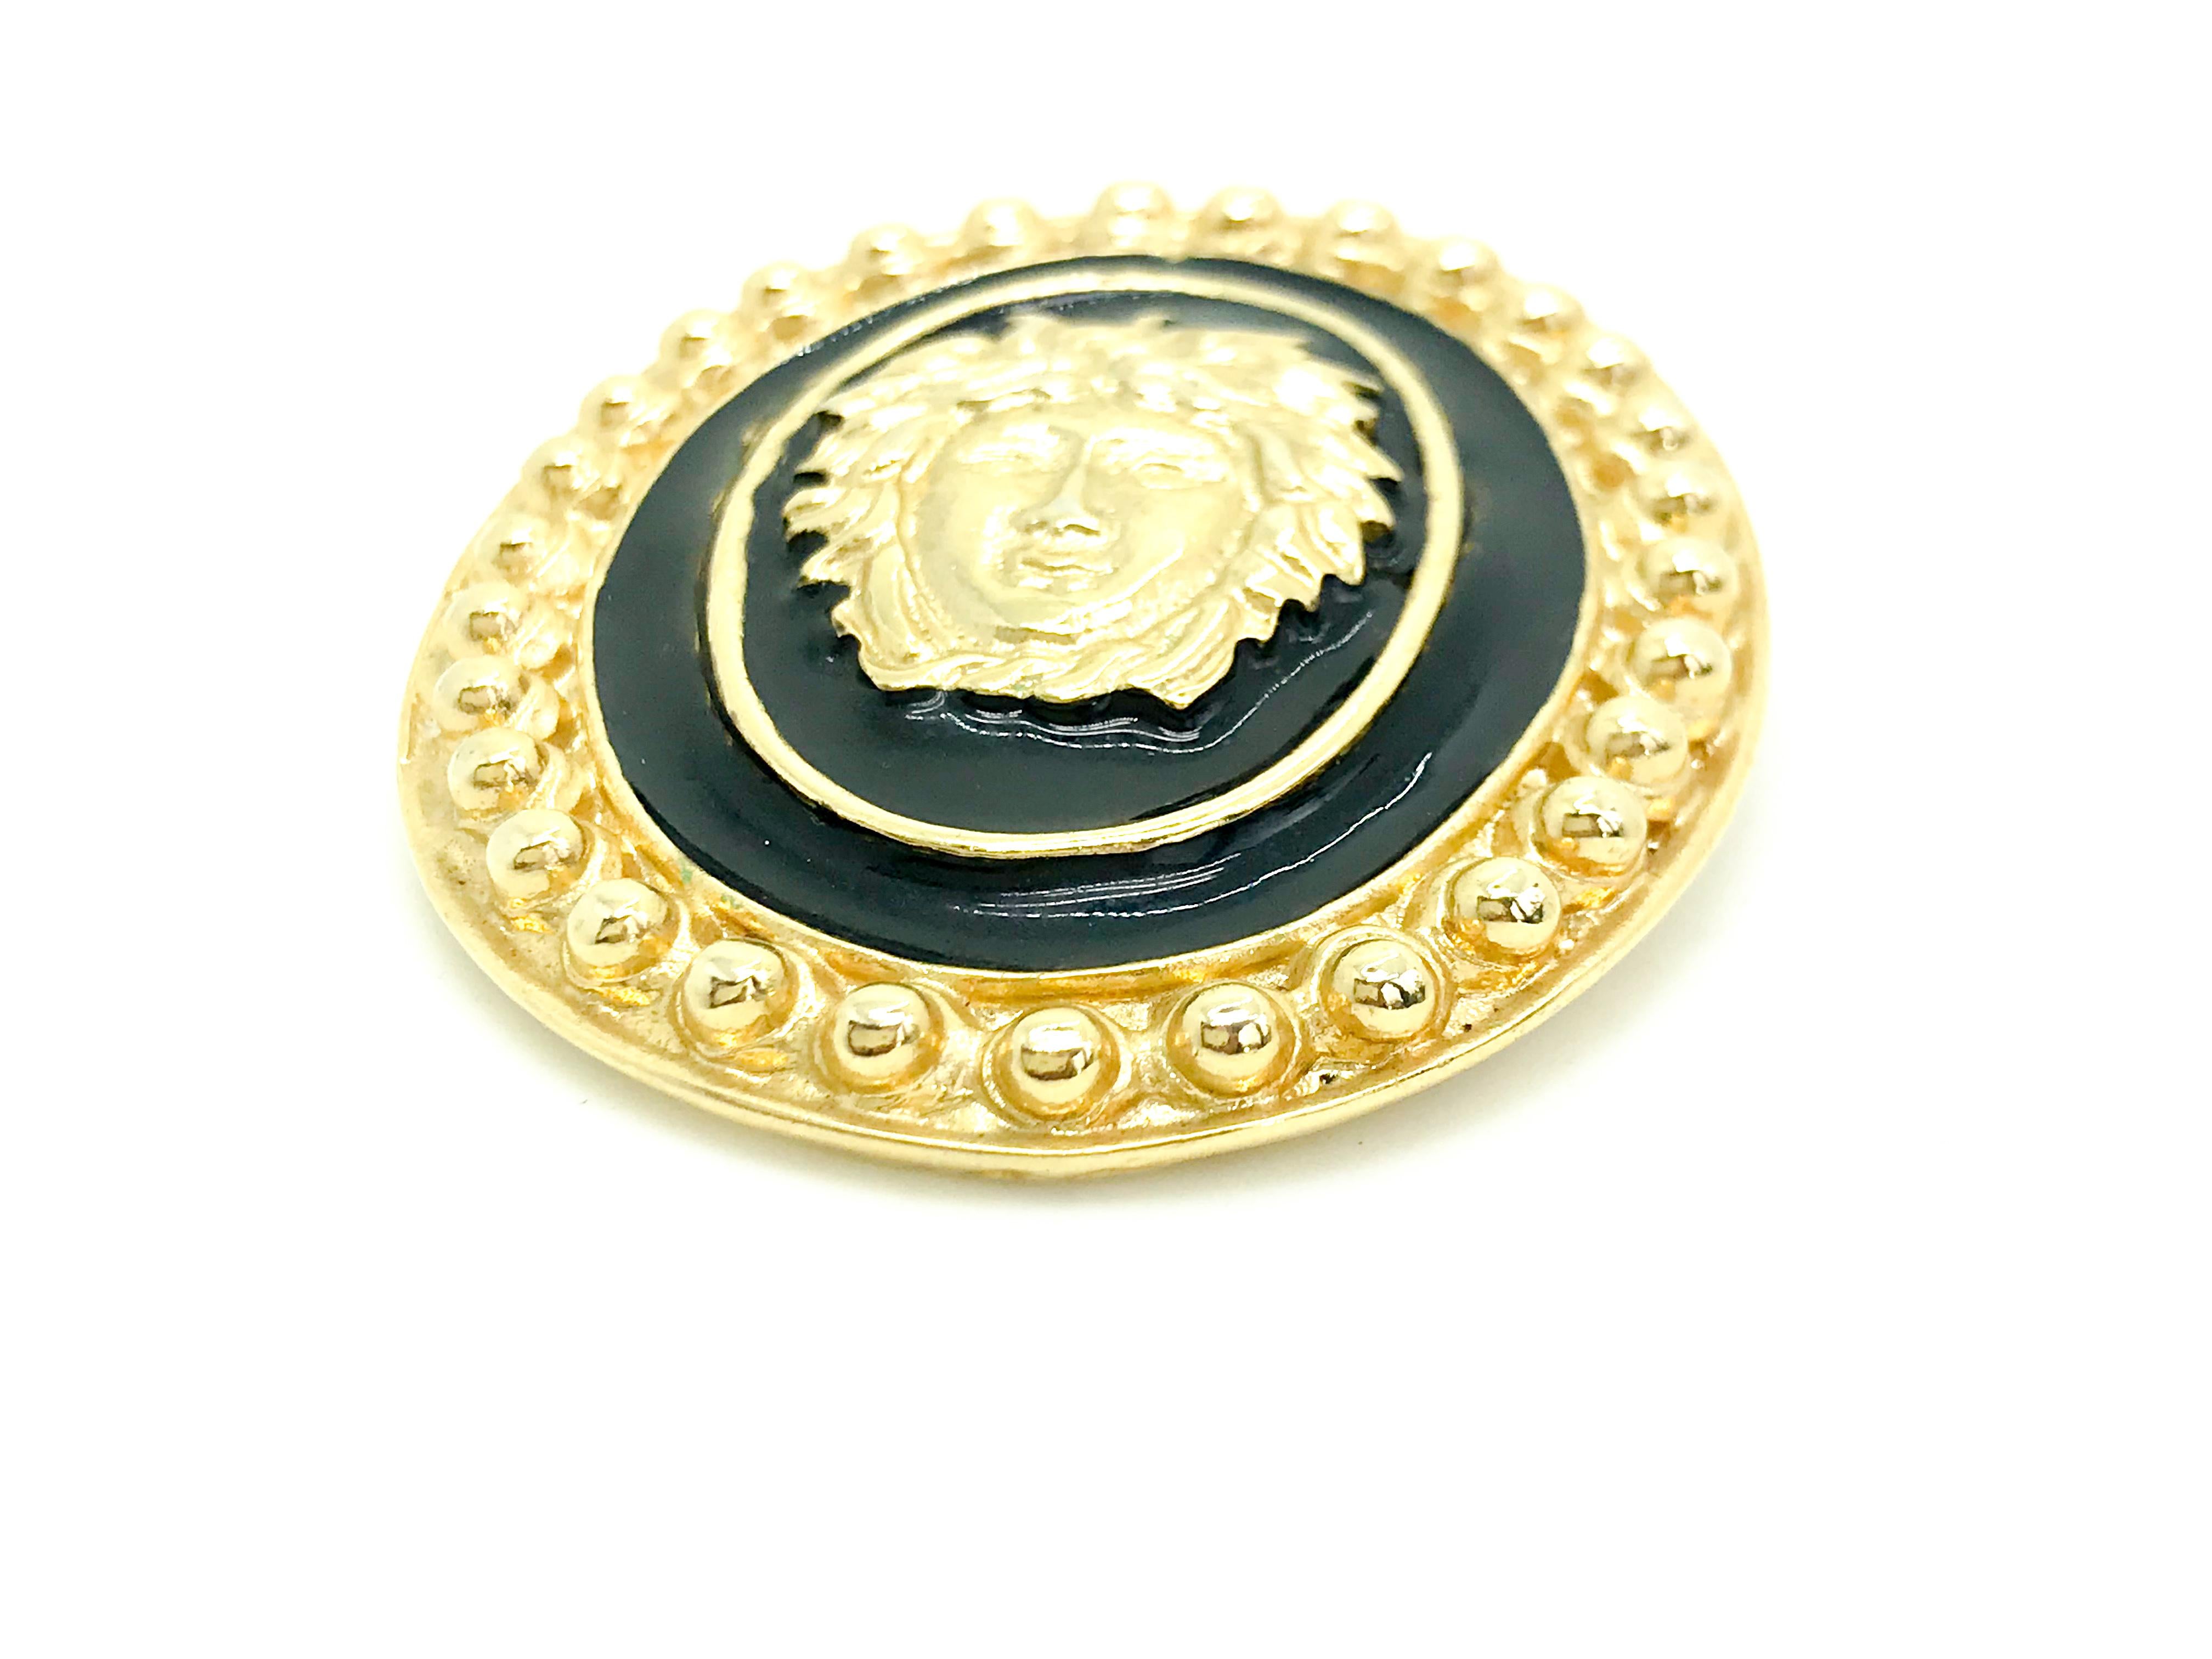 Gianni Versace 1980s Vintage Large Statement Brooch Pin  In Good Condition For Sale In London, GB